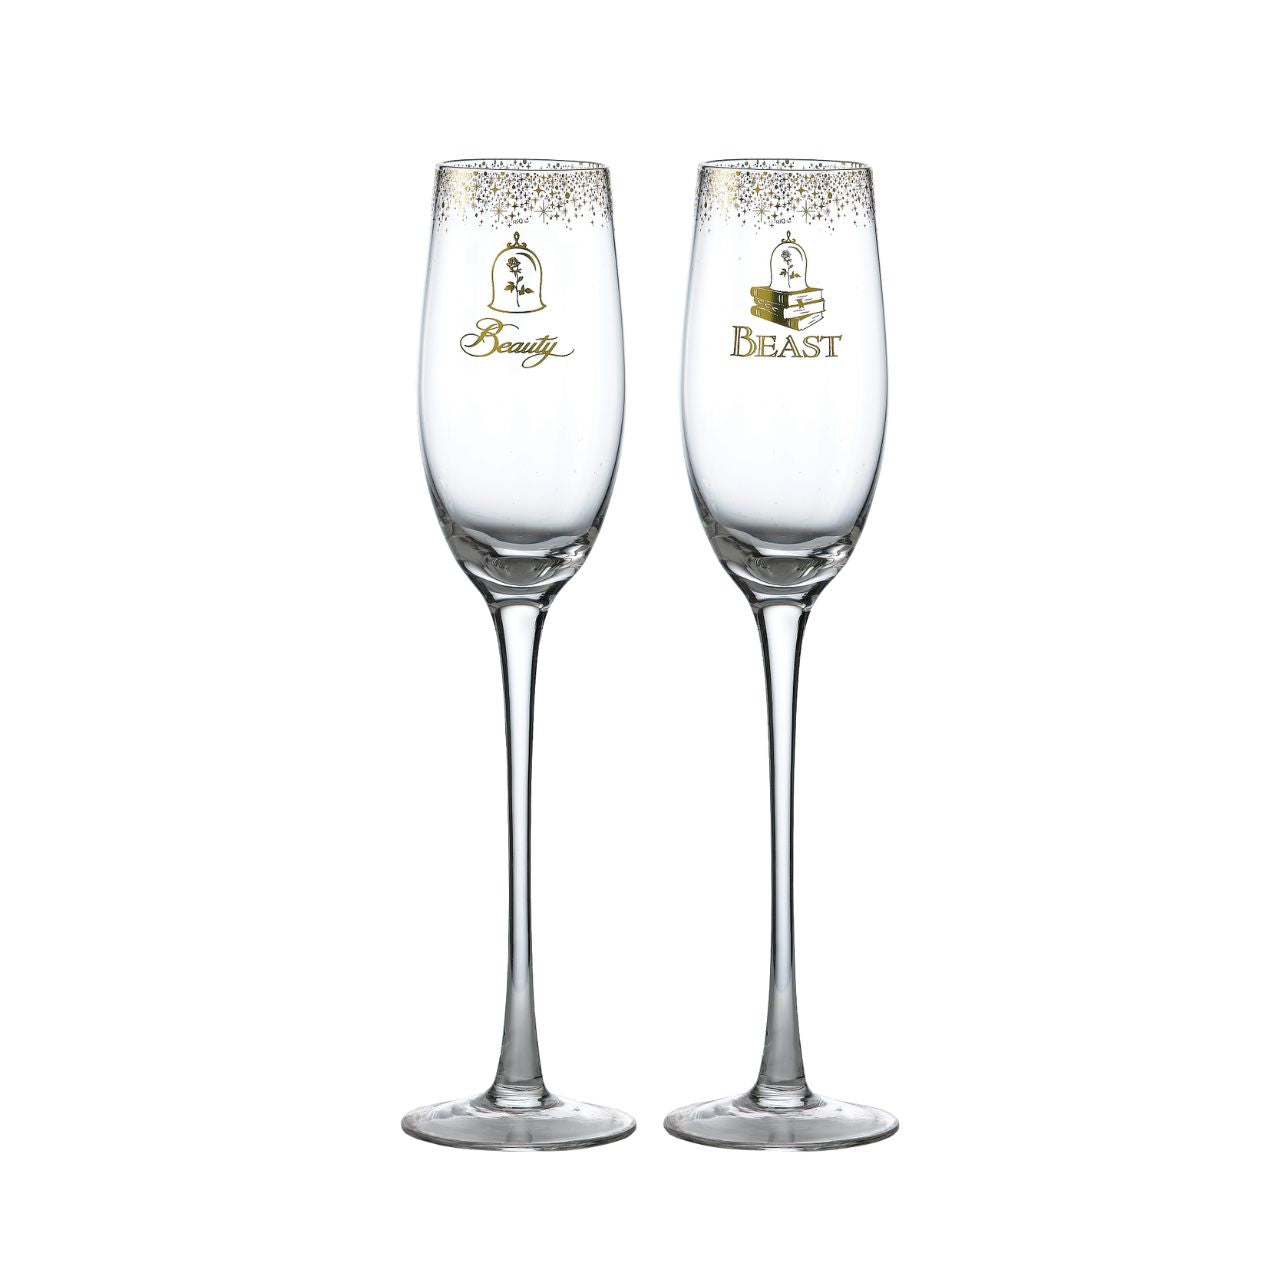 Beauty and the Beast Belle Wedding Toasting Glasses  Raise a toast in Disney style with our Beauty and the Beast glasses. The set of two glasses are the perfect gift and keepsake for the happy couple to use for their fairy tale wedding. Packed in a Disney branded window gift box.